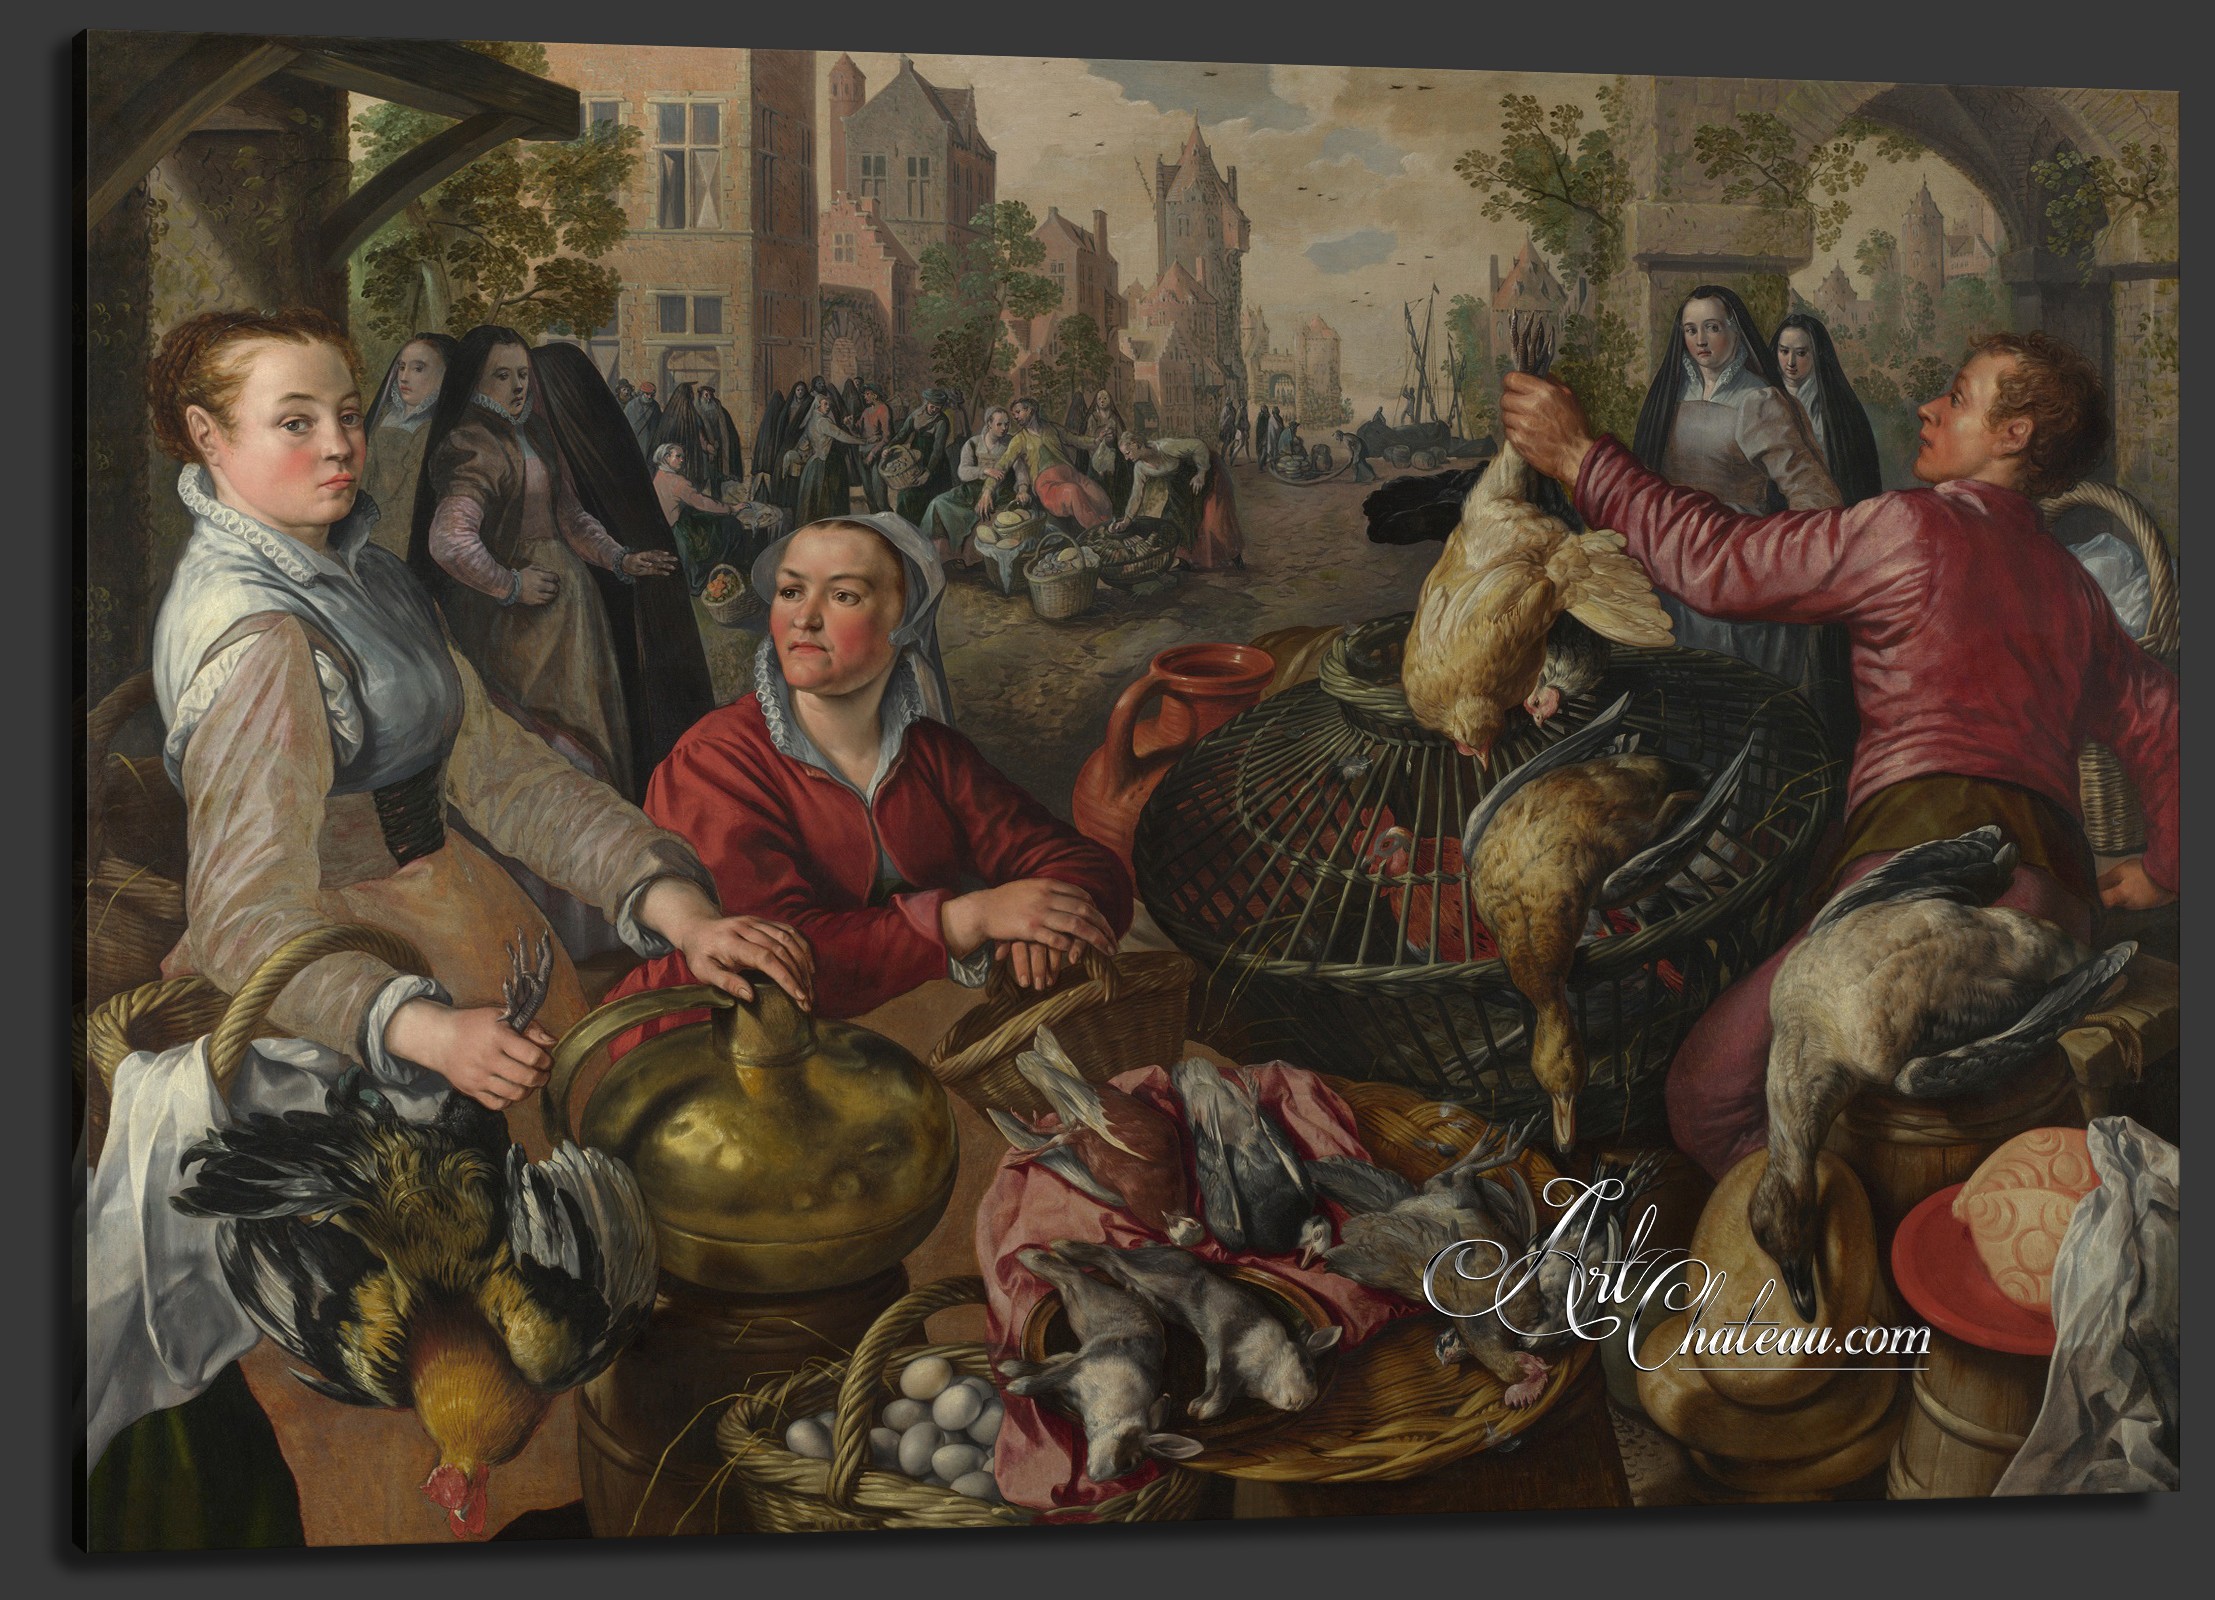 Poultry Market, after painting by Joachim Beuckelaer